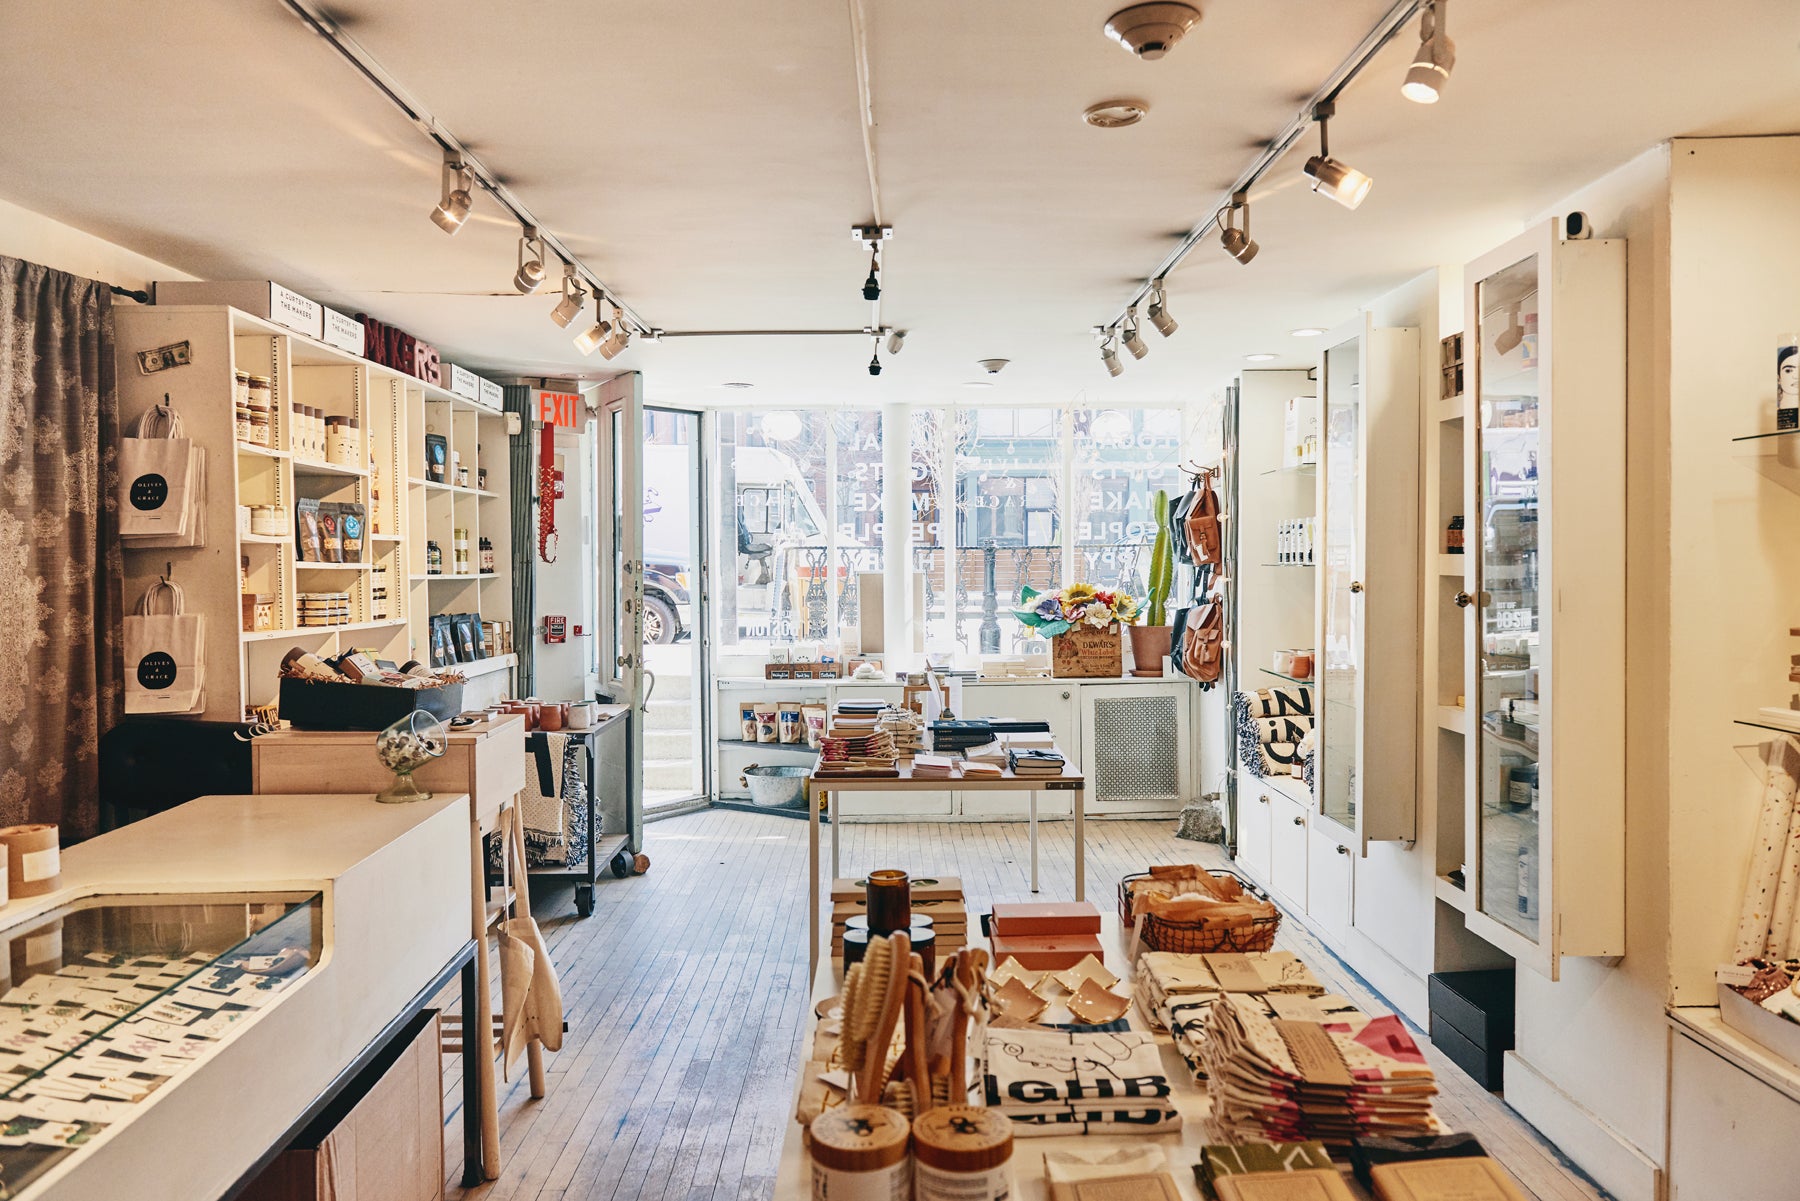 Wide image of the inside of Olives & Grace, showing shelves and tables merchandised with lifestyle goods.